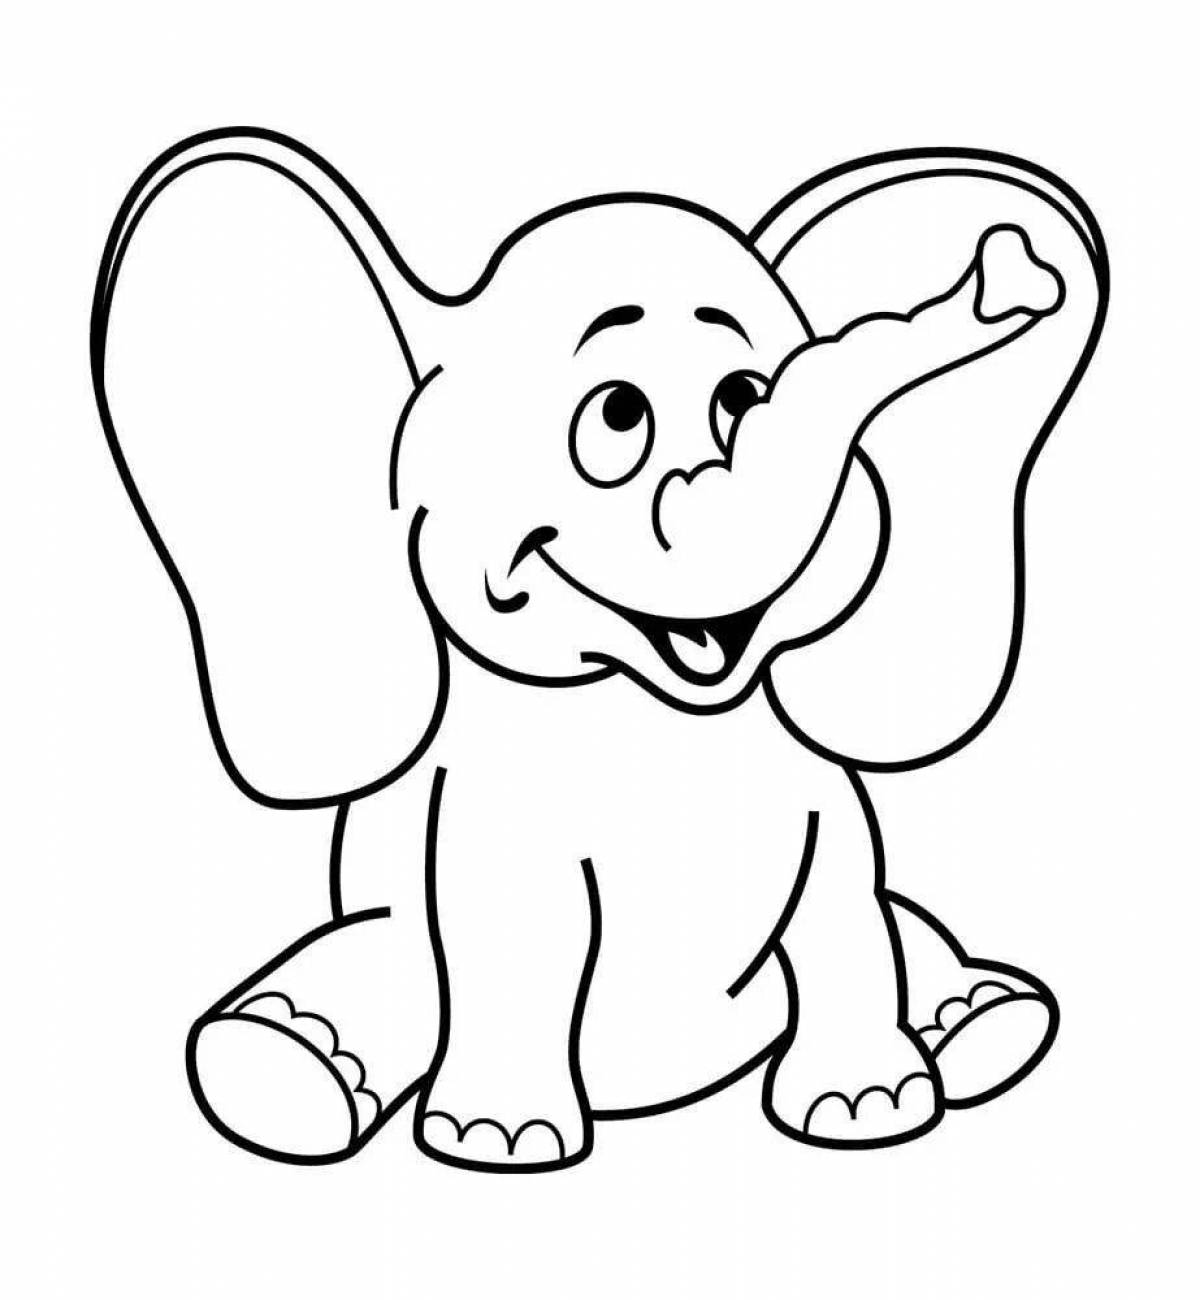 Animal coloring pages for kids 3 4